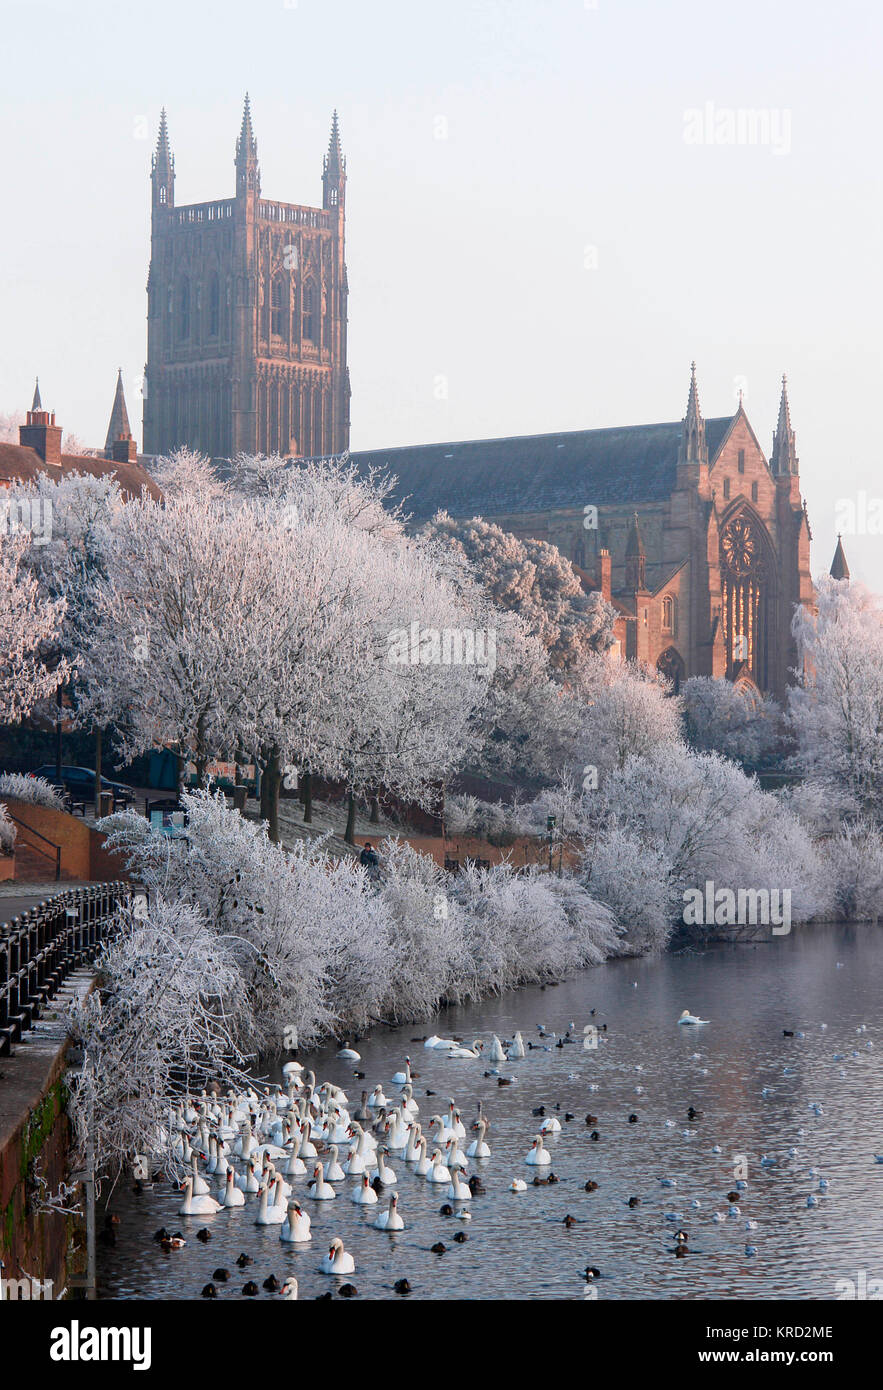 View of Worcester Cathedral, Worcestershire, near the River Severn, on a frosty day (one of the coldest on record).  The Cathedral's full name is The Cathedral Church of Christ and the Blessed Mary the Virgin of Worcester.  Built between 1084 and 1504, it represents every style of English architecture from Norman to Perpendicular Gothic. Stock Photo